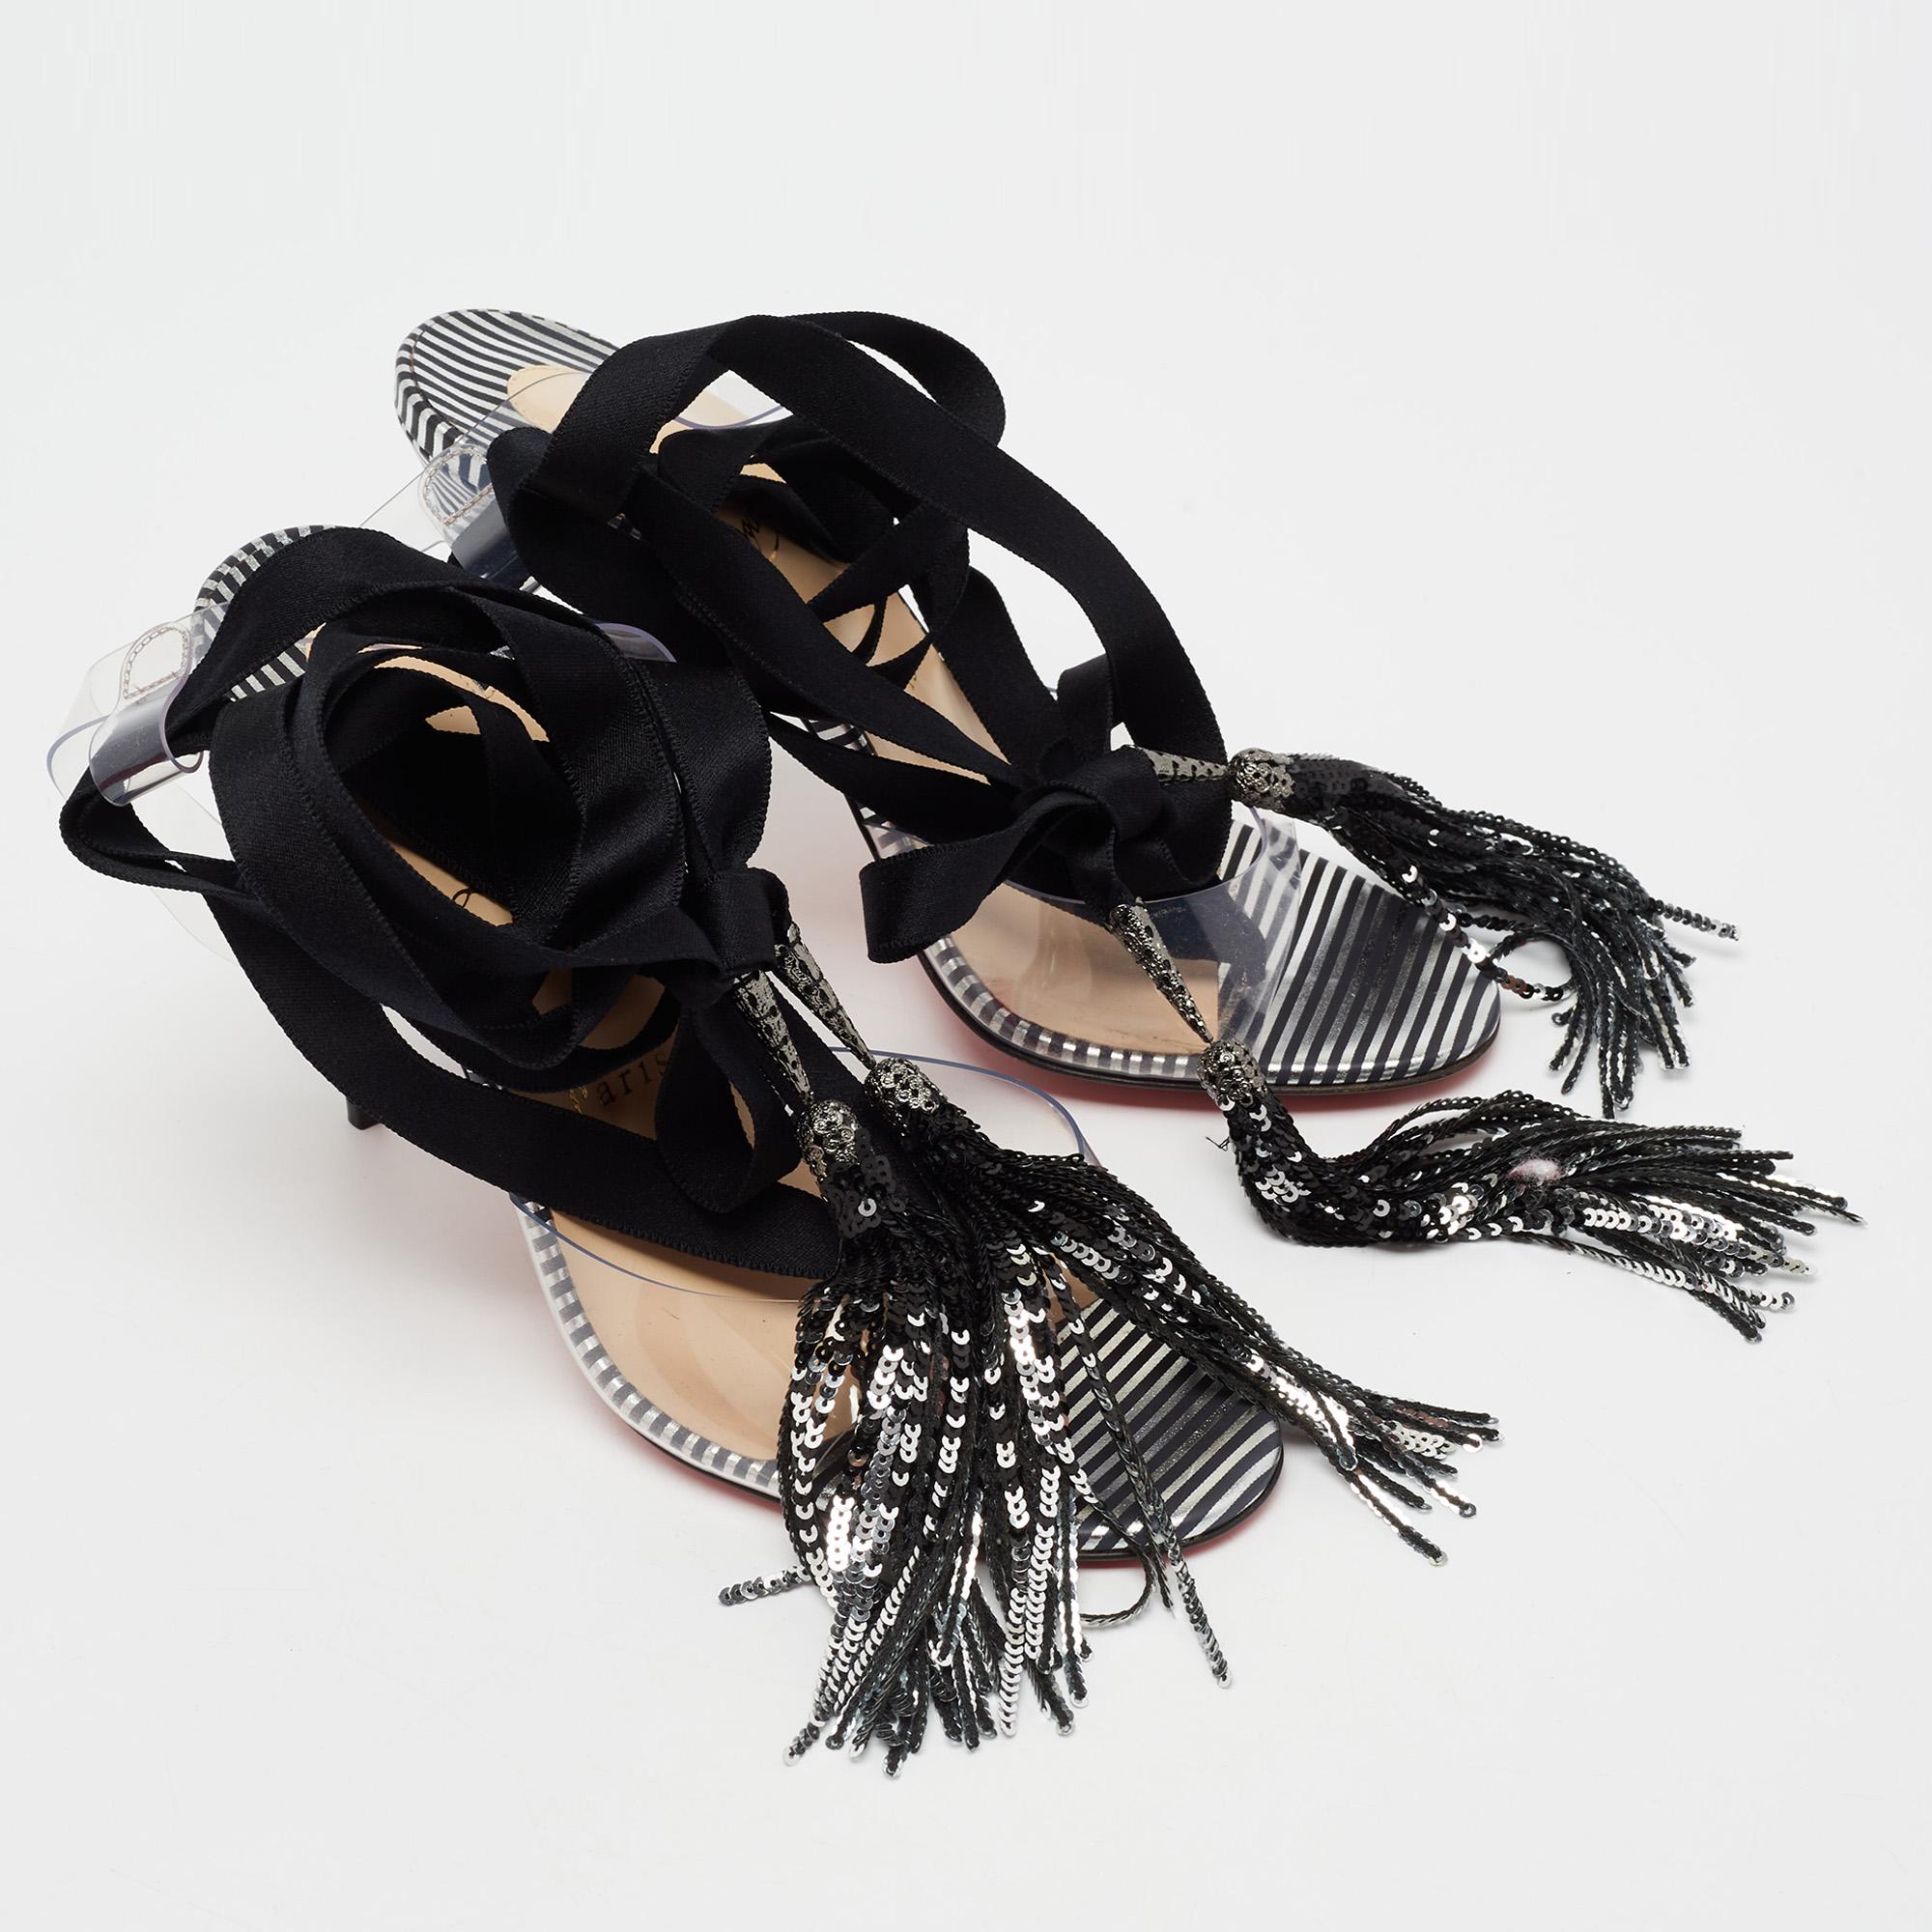 These quirky yet comfortable sandals from Christian Louboutin are truly head-turning. They are modern in their transparent PVC body and beyond stylish in their design. The statement sandals feature slender 11 cm heels, tie-up laces, and open-toes.